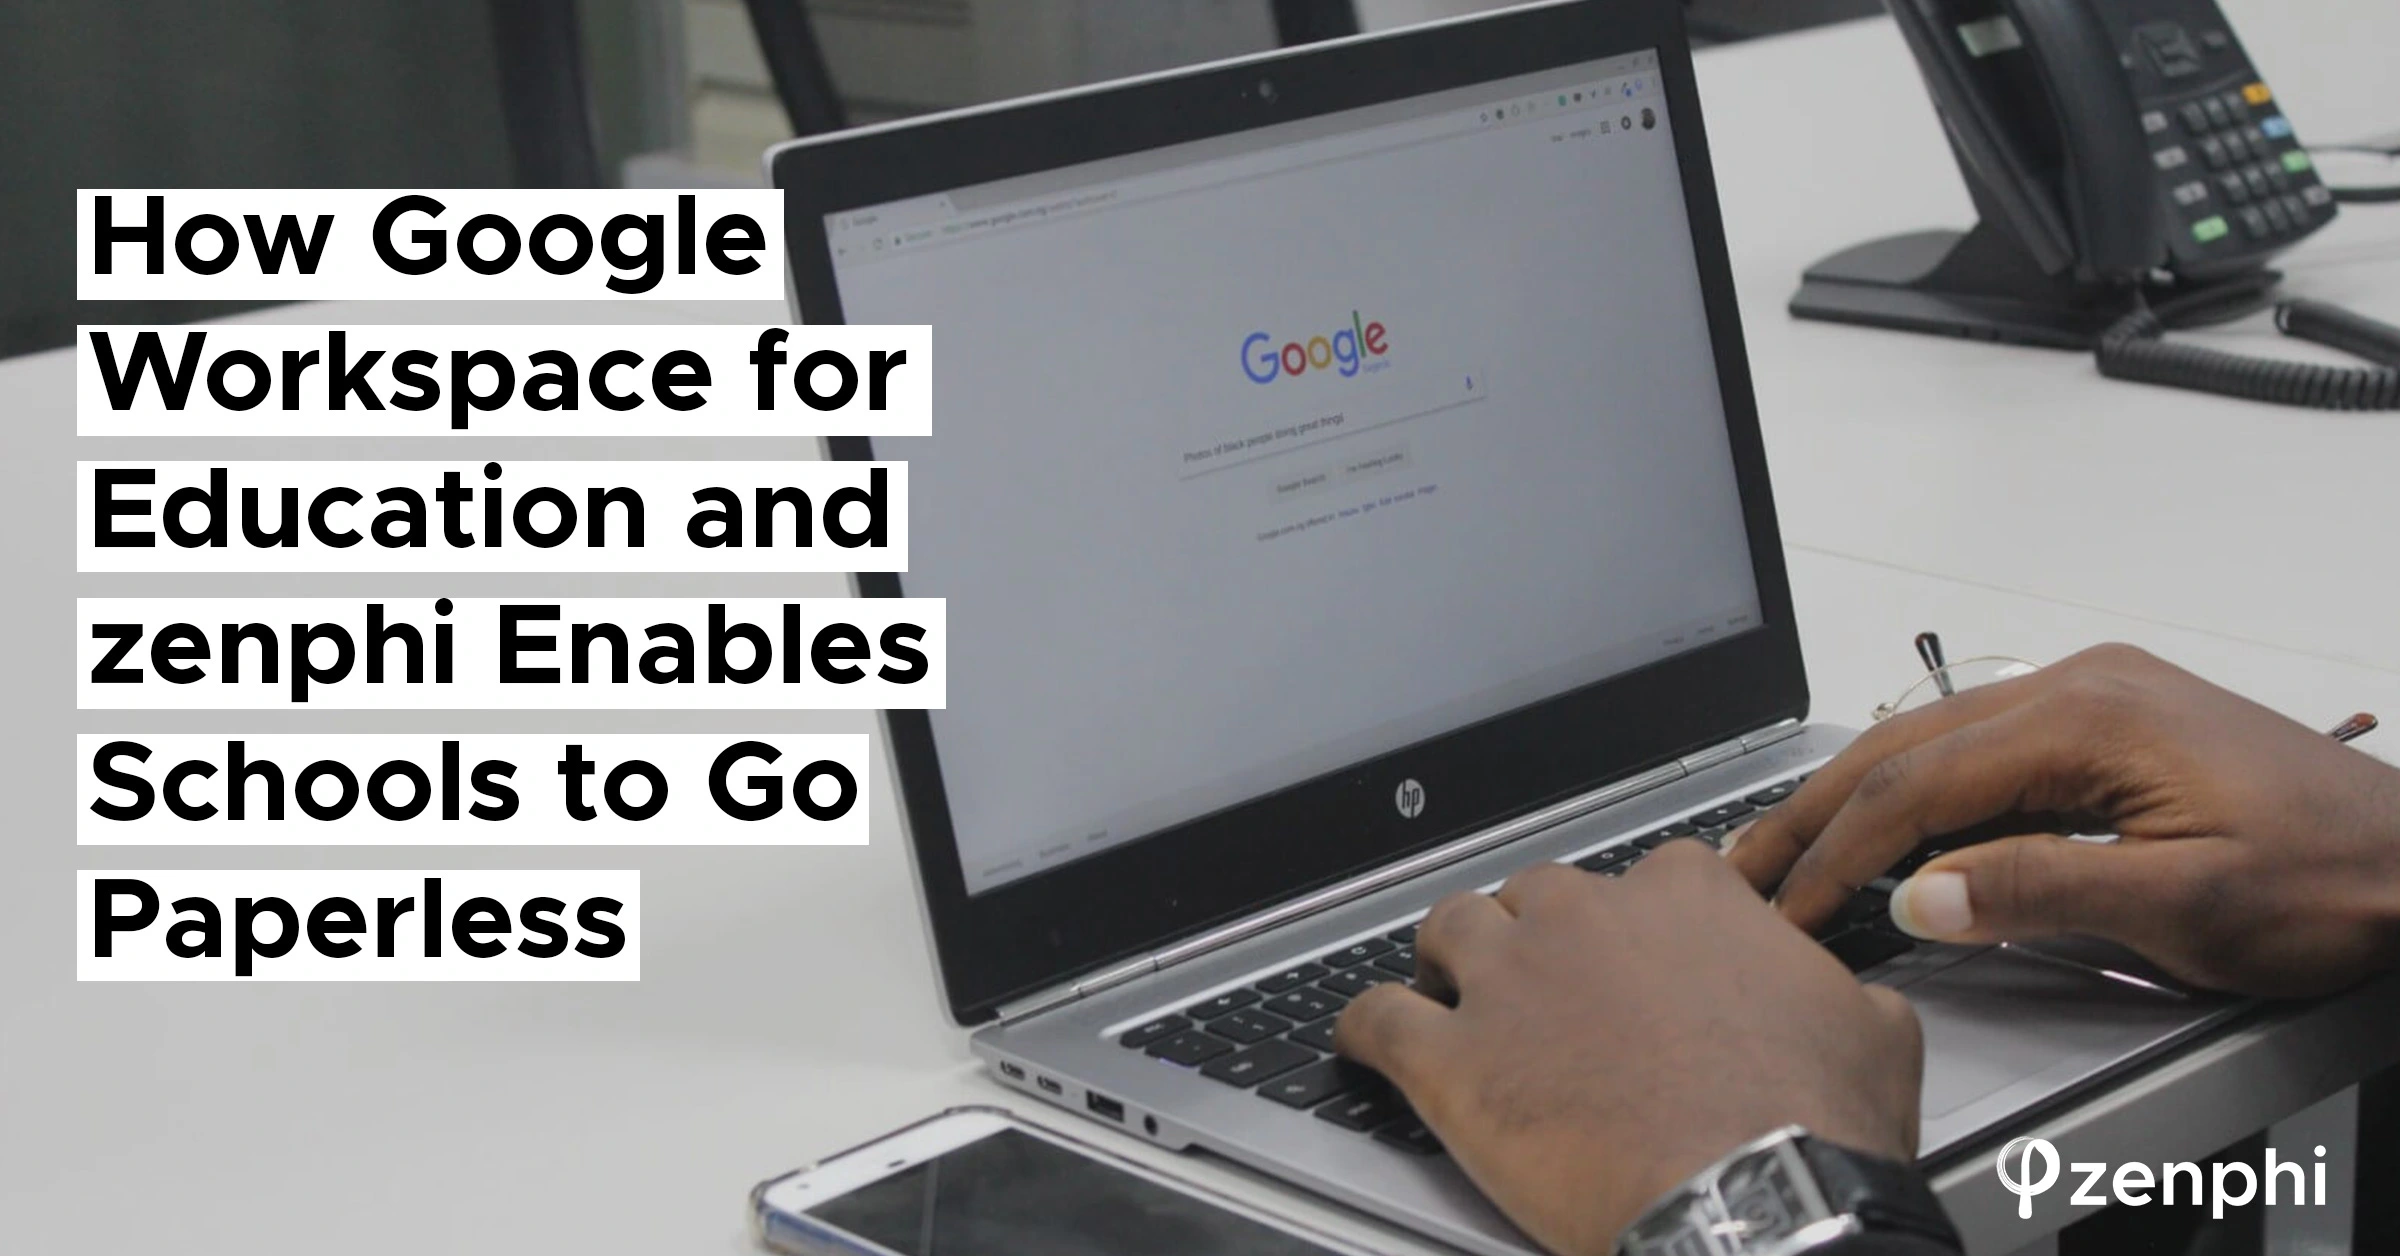 Google Workspace for Education and zenphi Enables Schools to Go Paperless